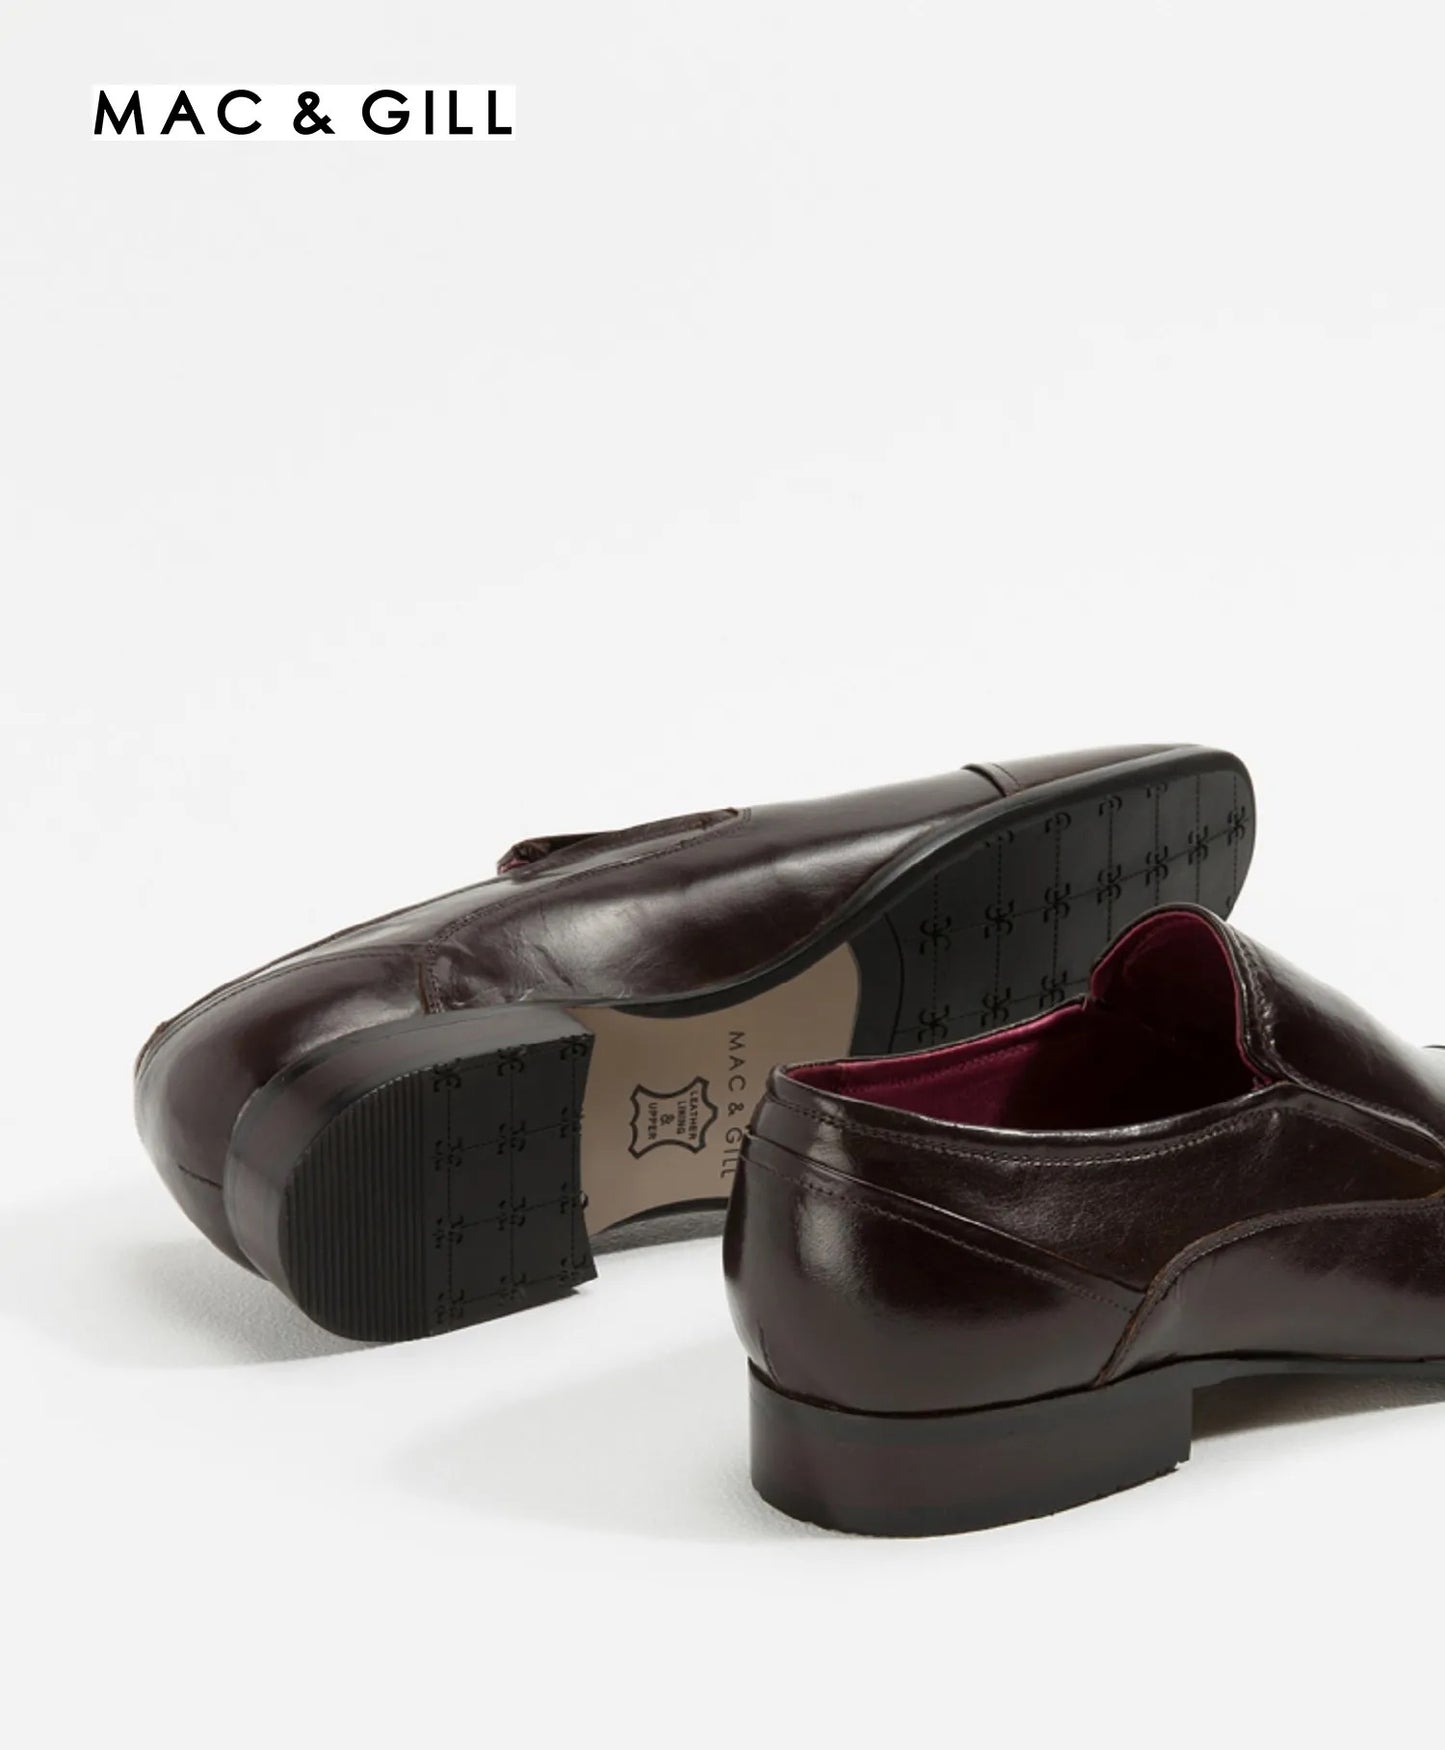 Austin Leather Loafer Business Shoes in Dark Brown